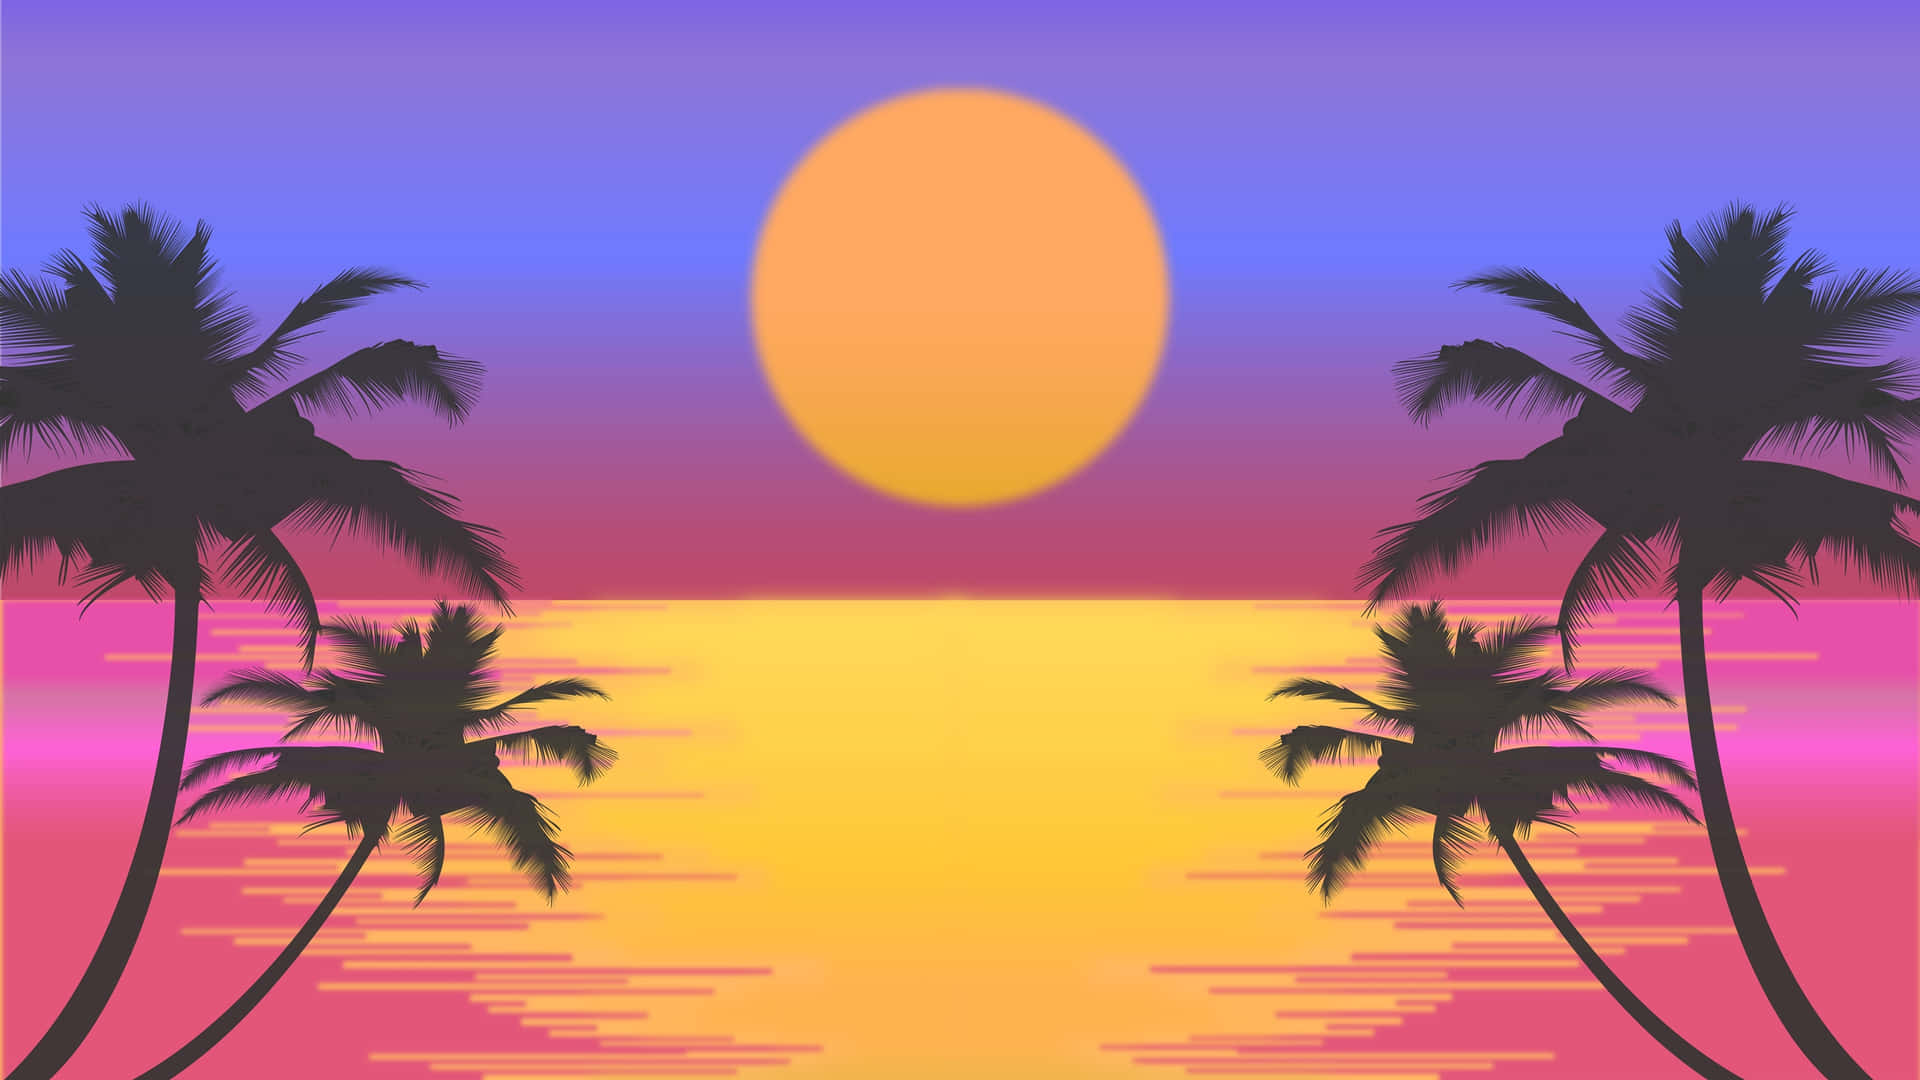 Let's Take a Moment to Enjoy This Beautiful Retro Sunset Wallpaper